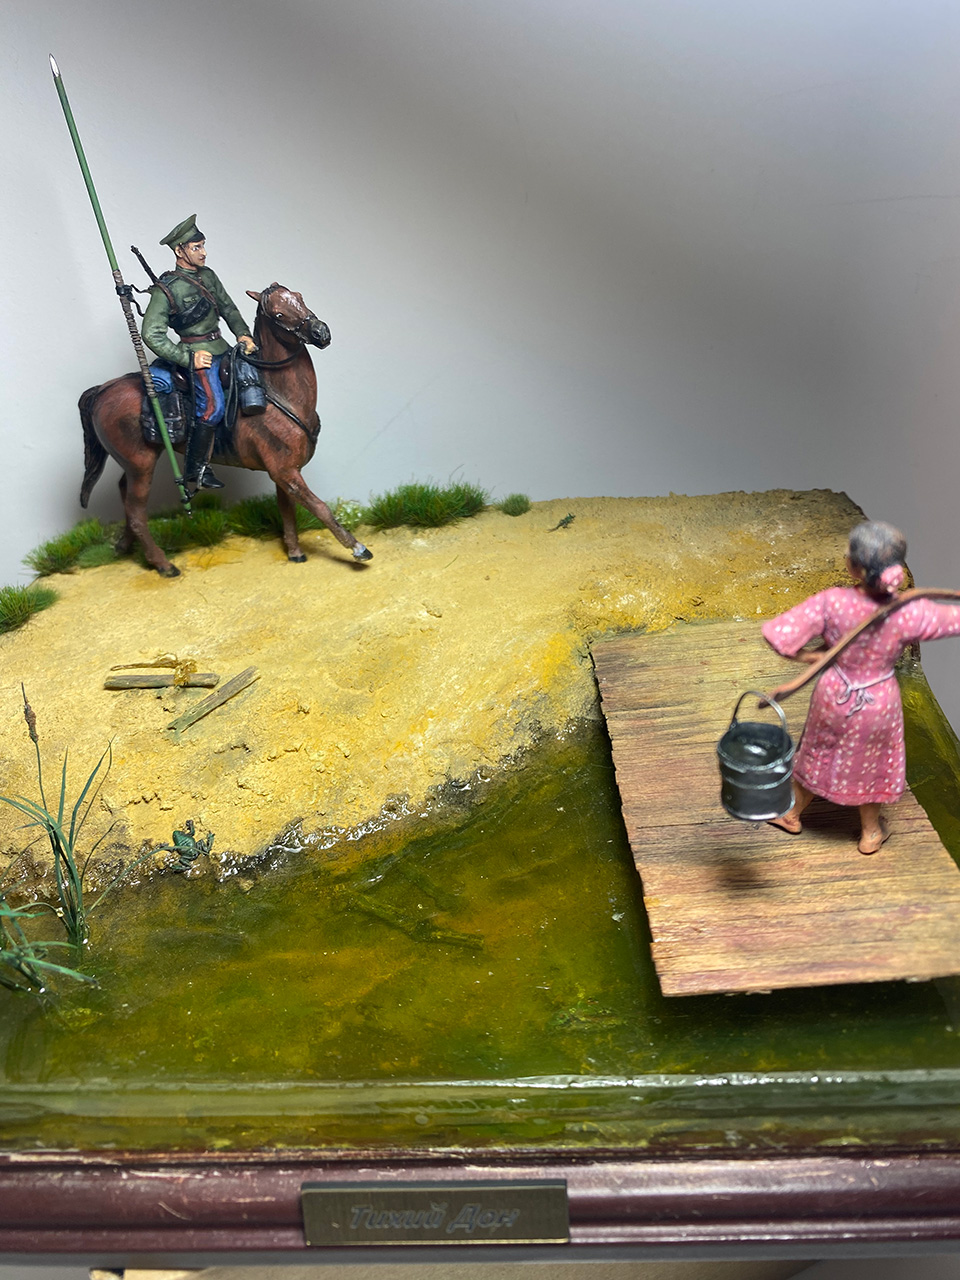 Dioramas and Vignettes: And Quiet Flows the Don, photo #7